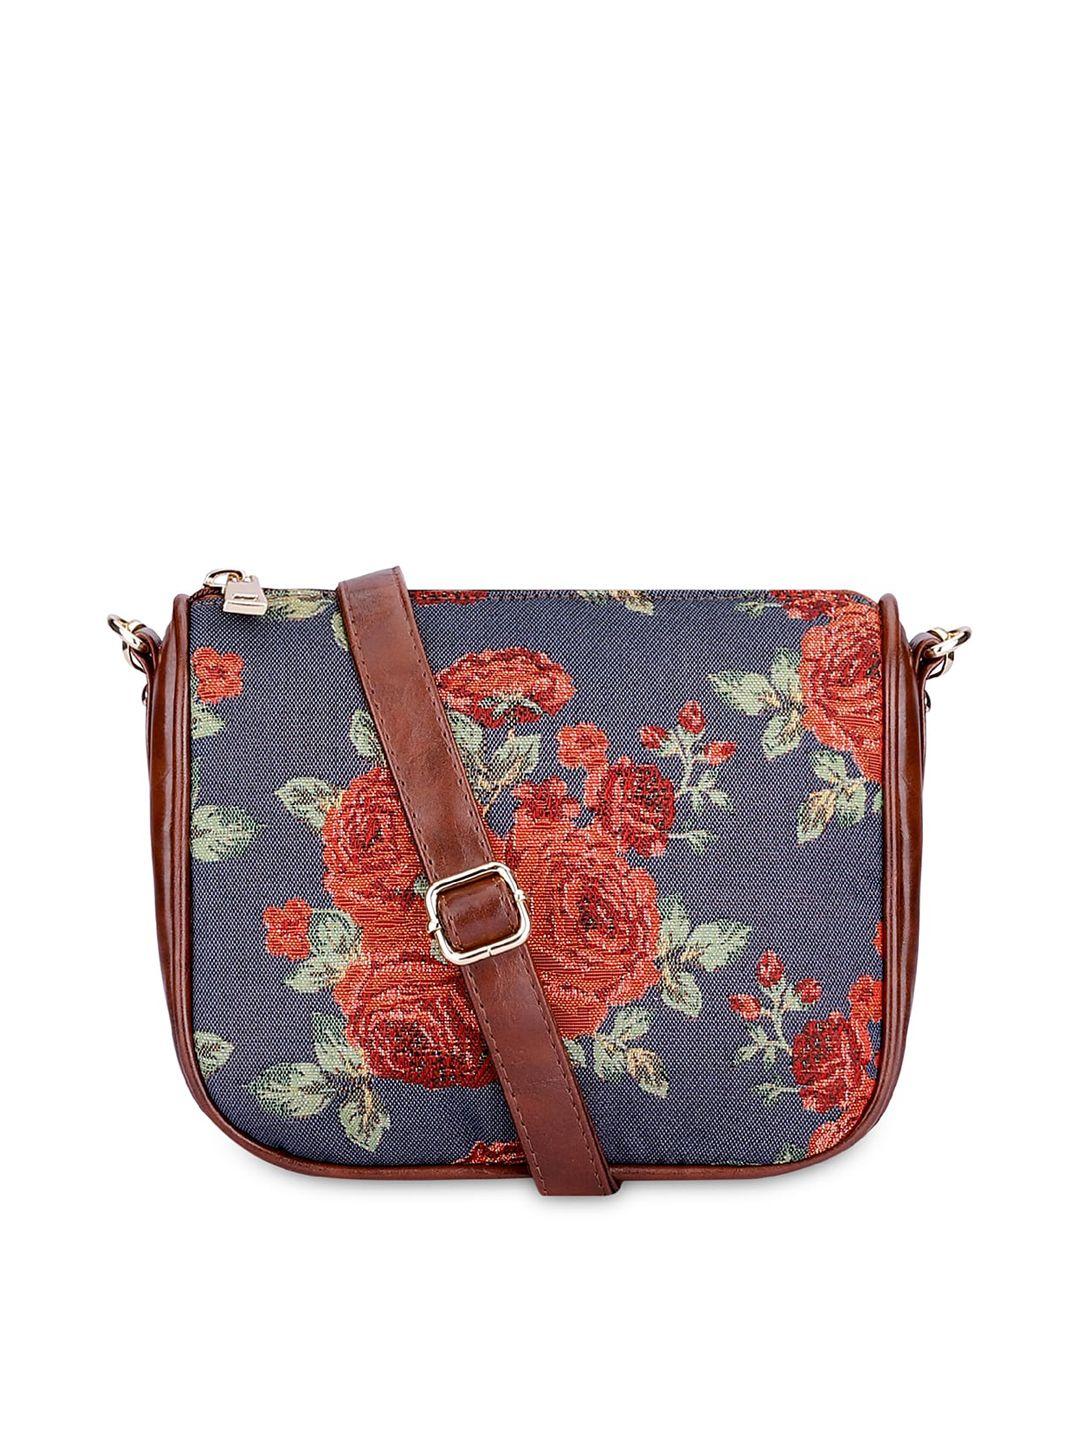 the-clownfish-navy-blue-floral-printed-structured-sling-bag